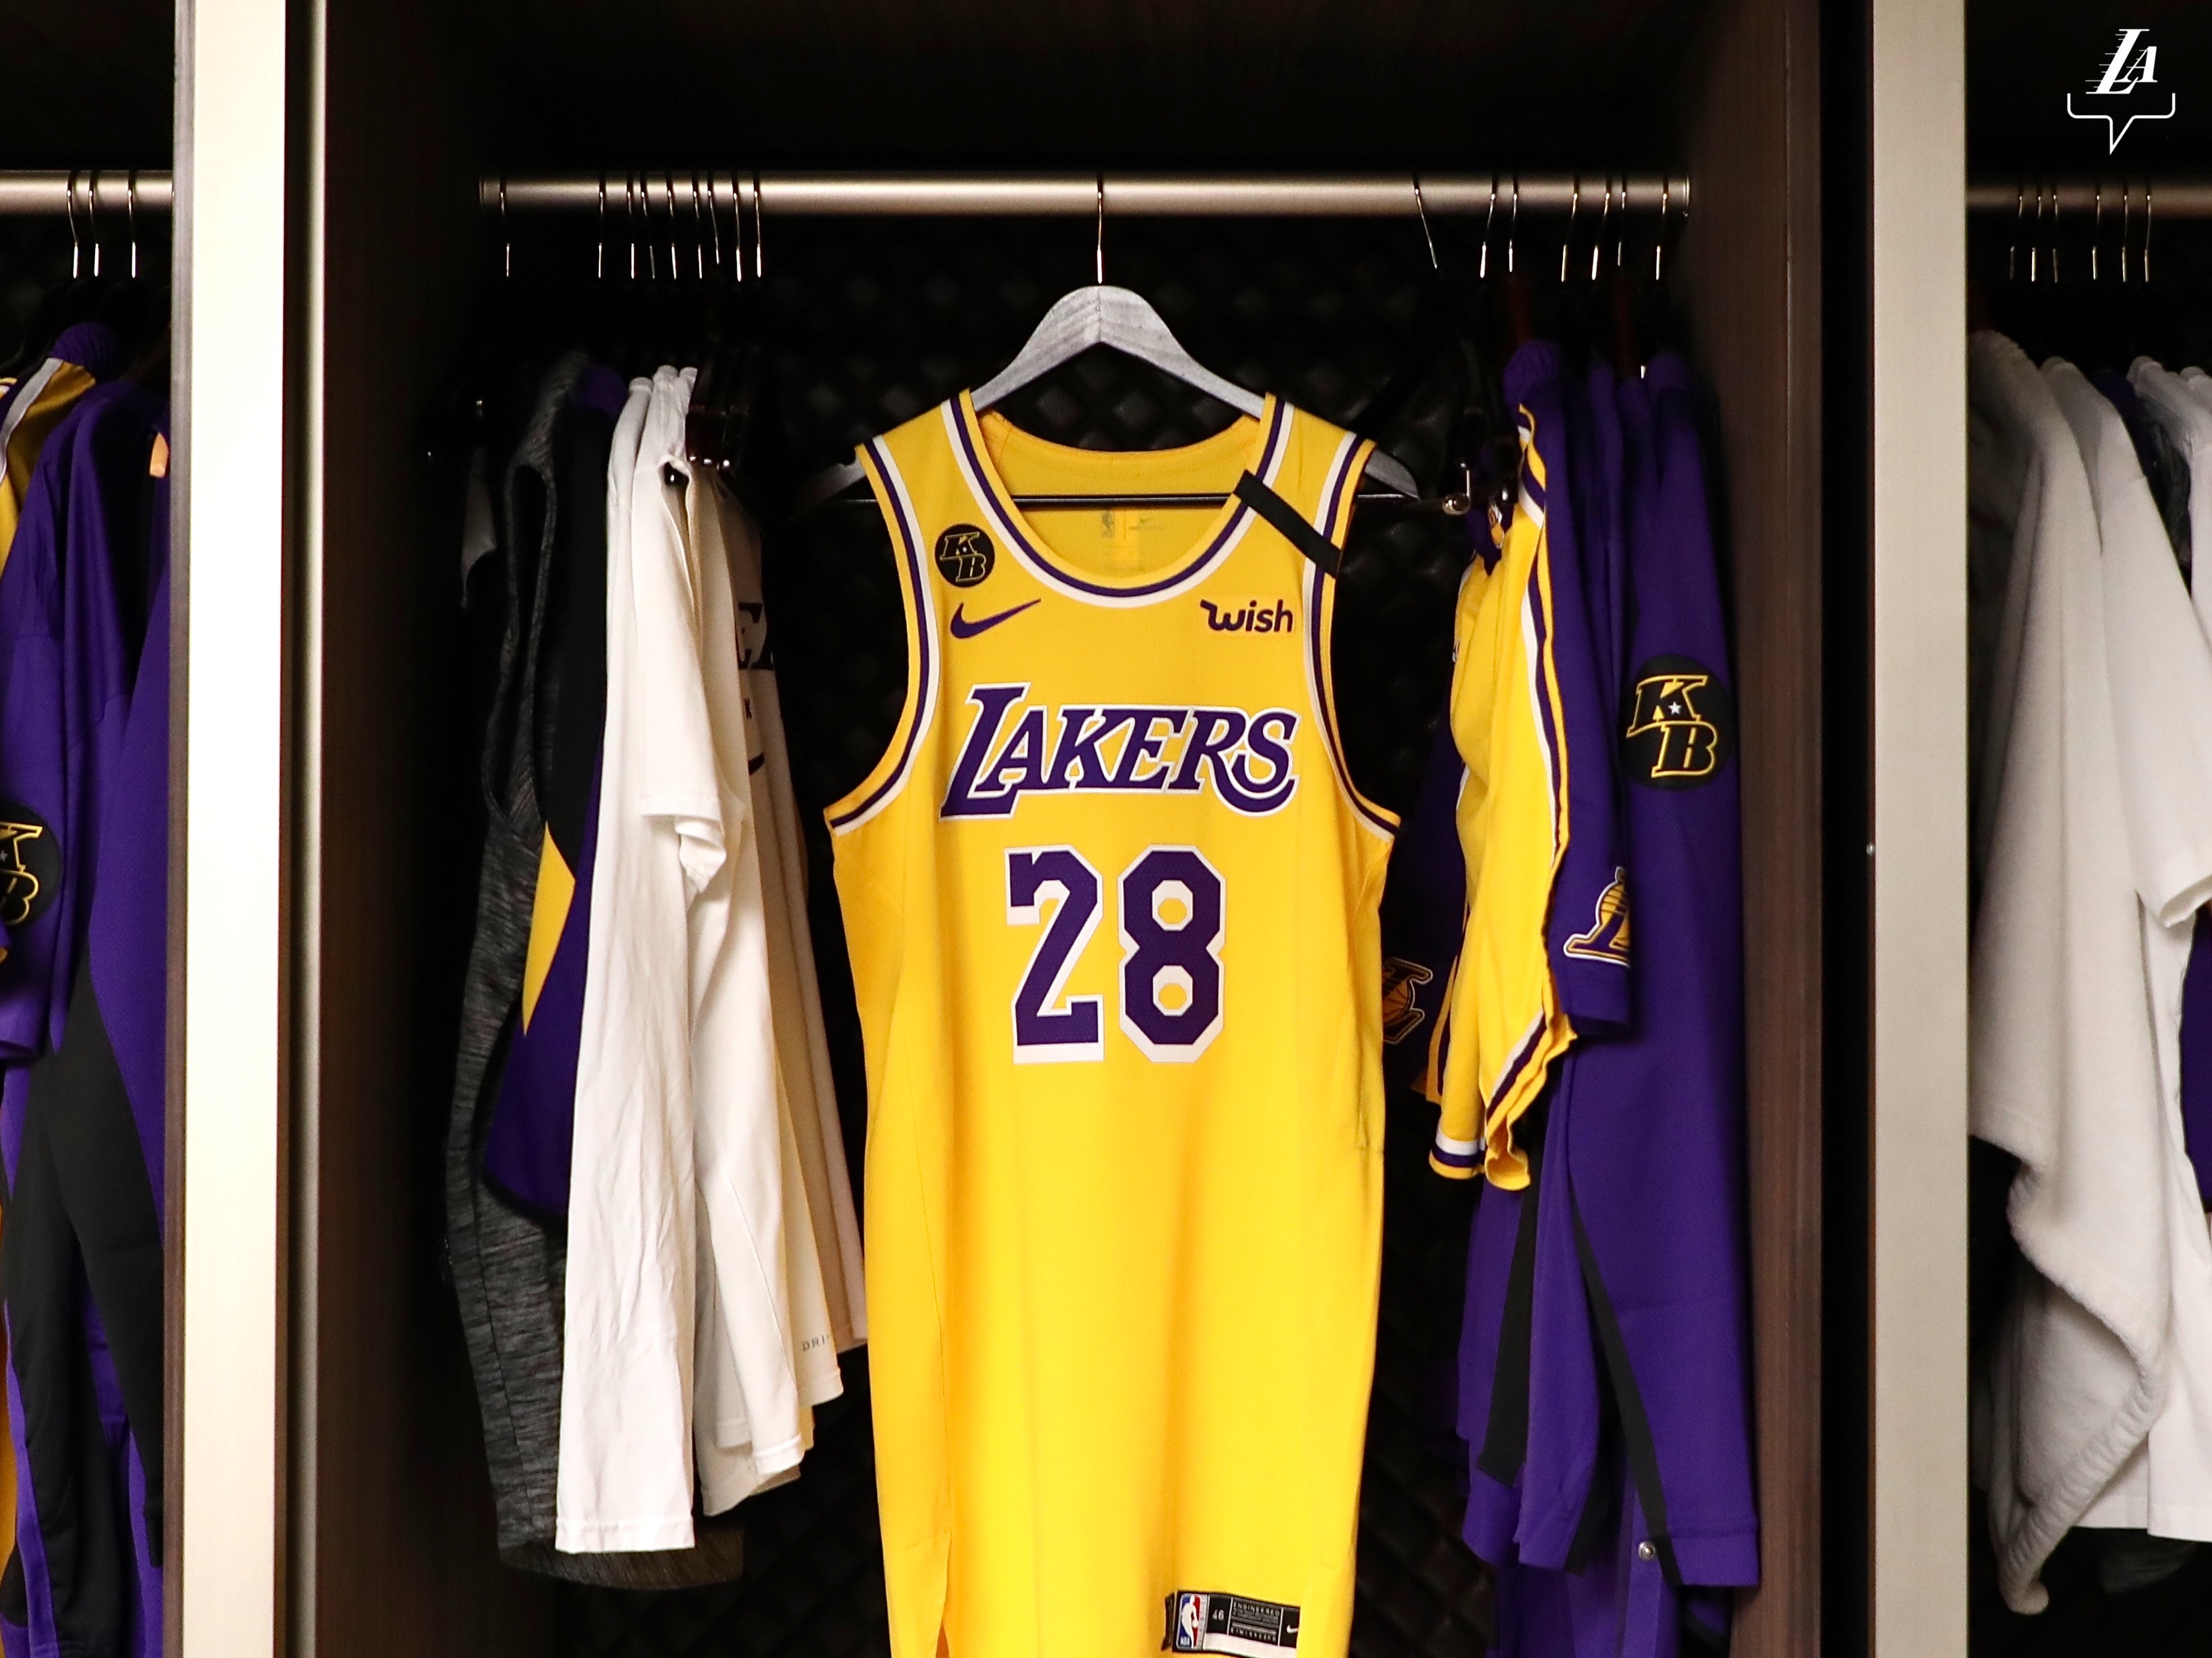 Lakers Store - It's a #lakersfamily homecoming tonight at